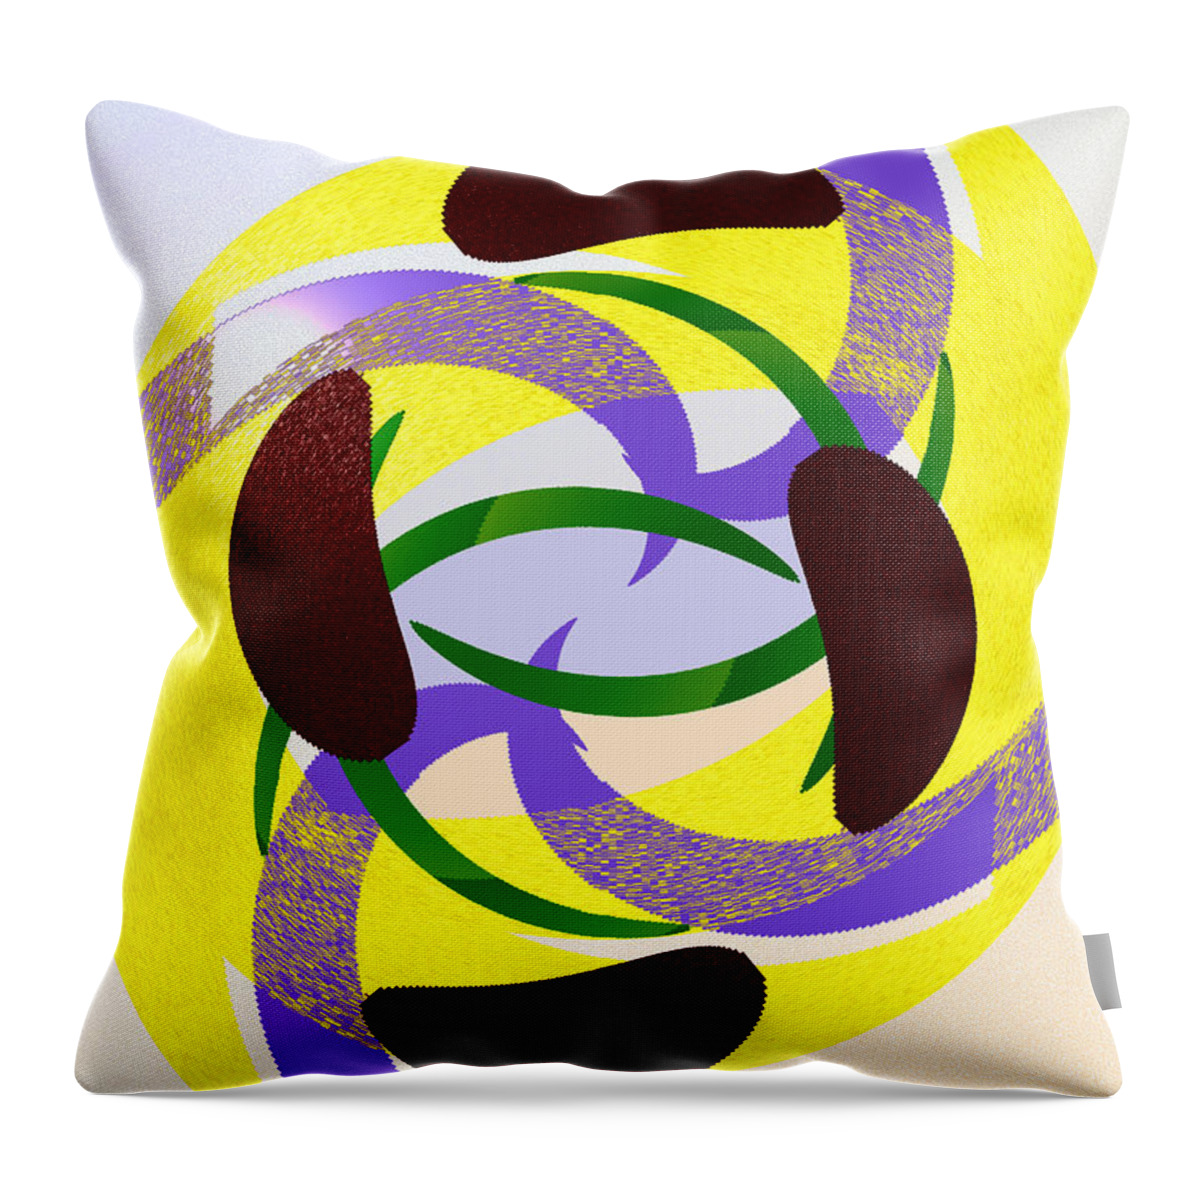 Abstract Throw Pillow featuring the digital art Abstract - Turning by Kae Cheatham